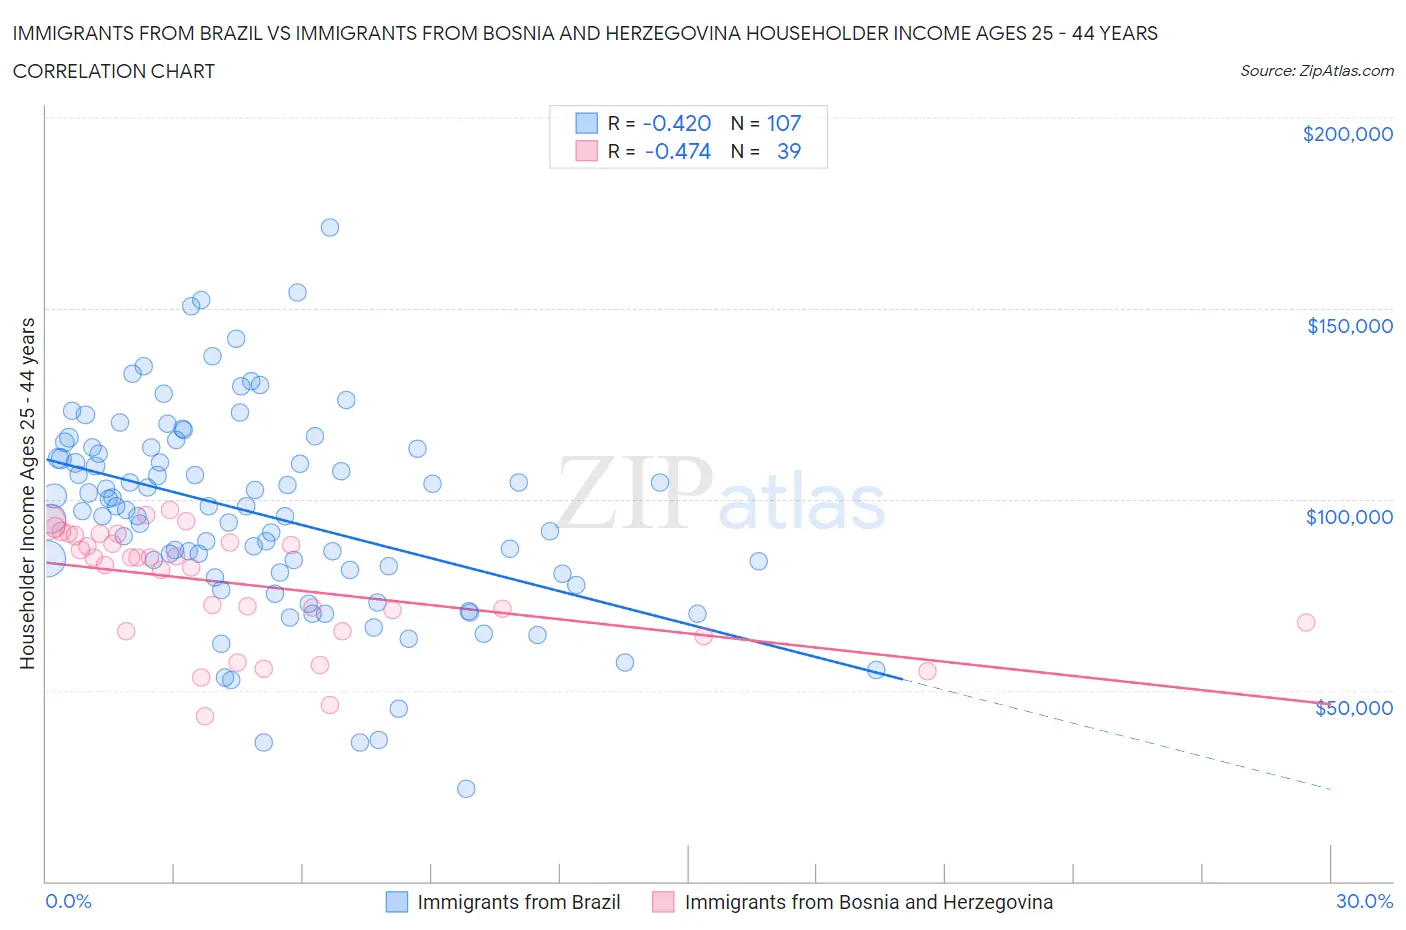 Immigrants from Brazil vs Immigrants from Bosnia and Herzegovina Householder Income Ages 25 - 44 years